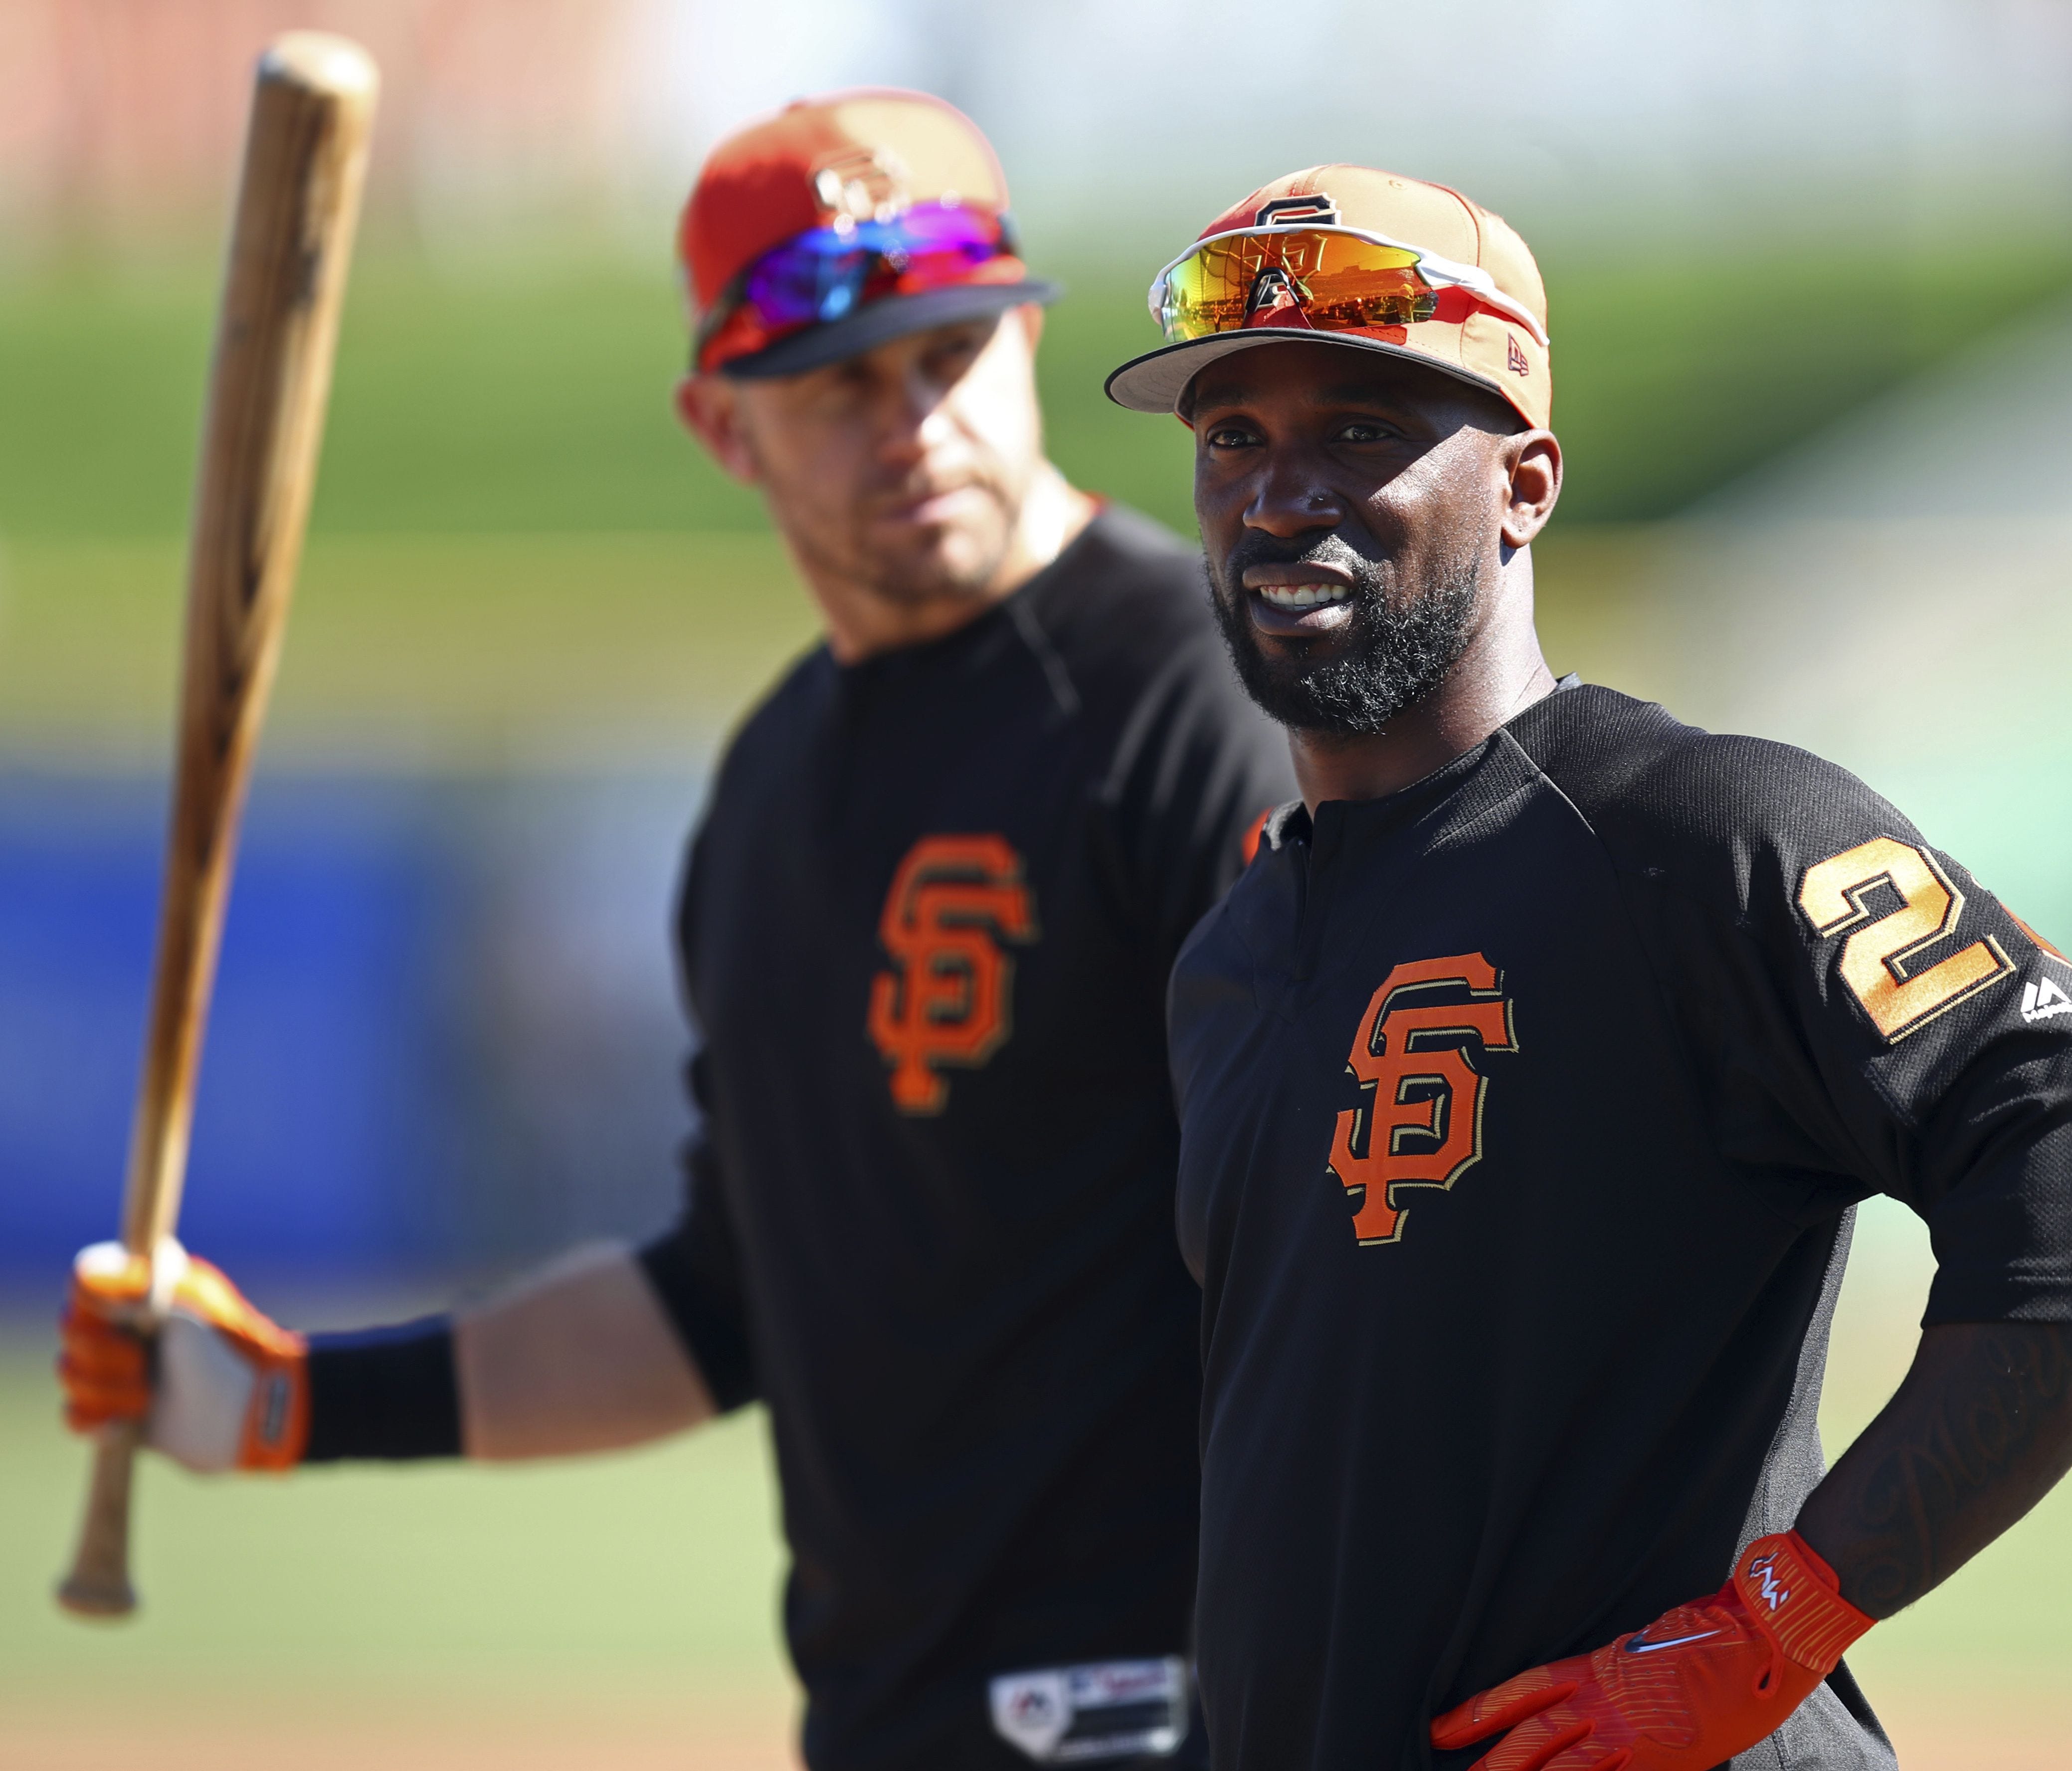 Evan Longoria, left, and Andrew McCutchen are two of the new faces on the Giants.